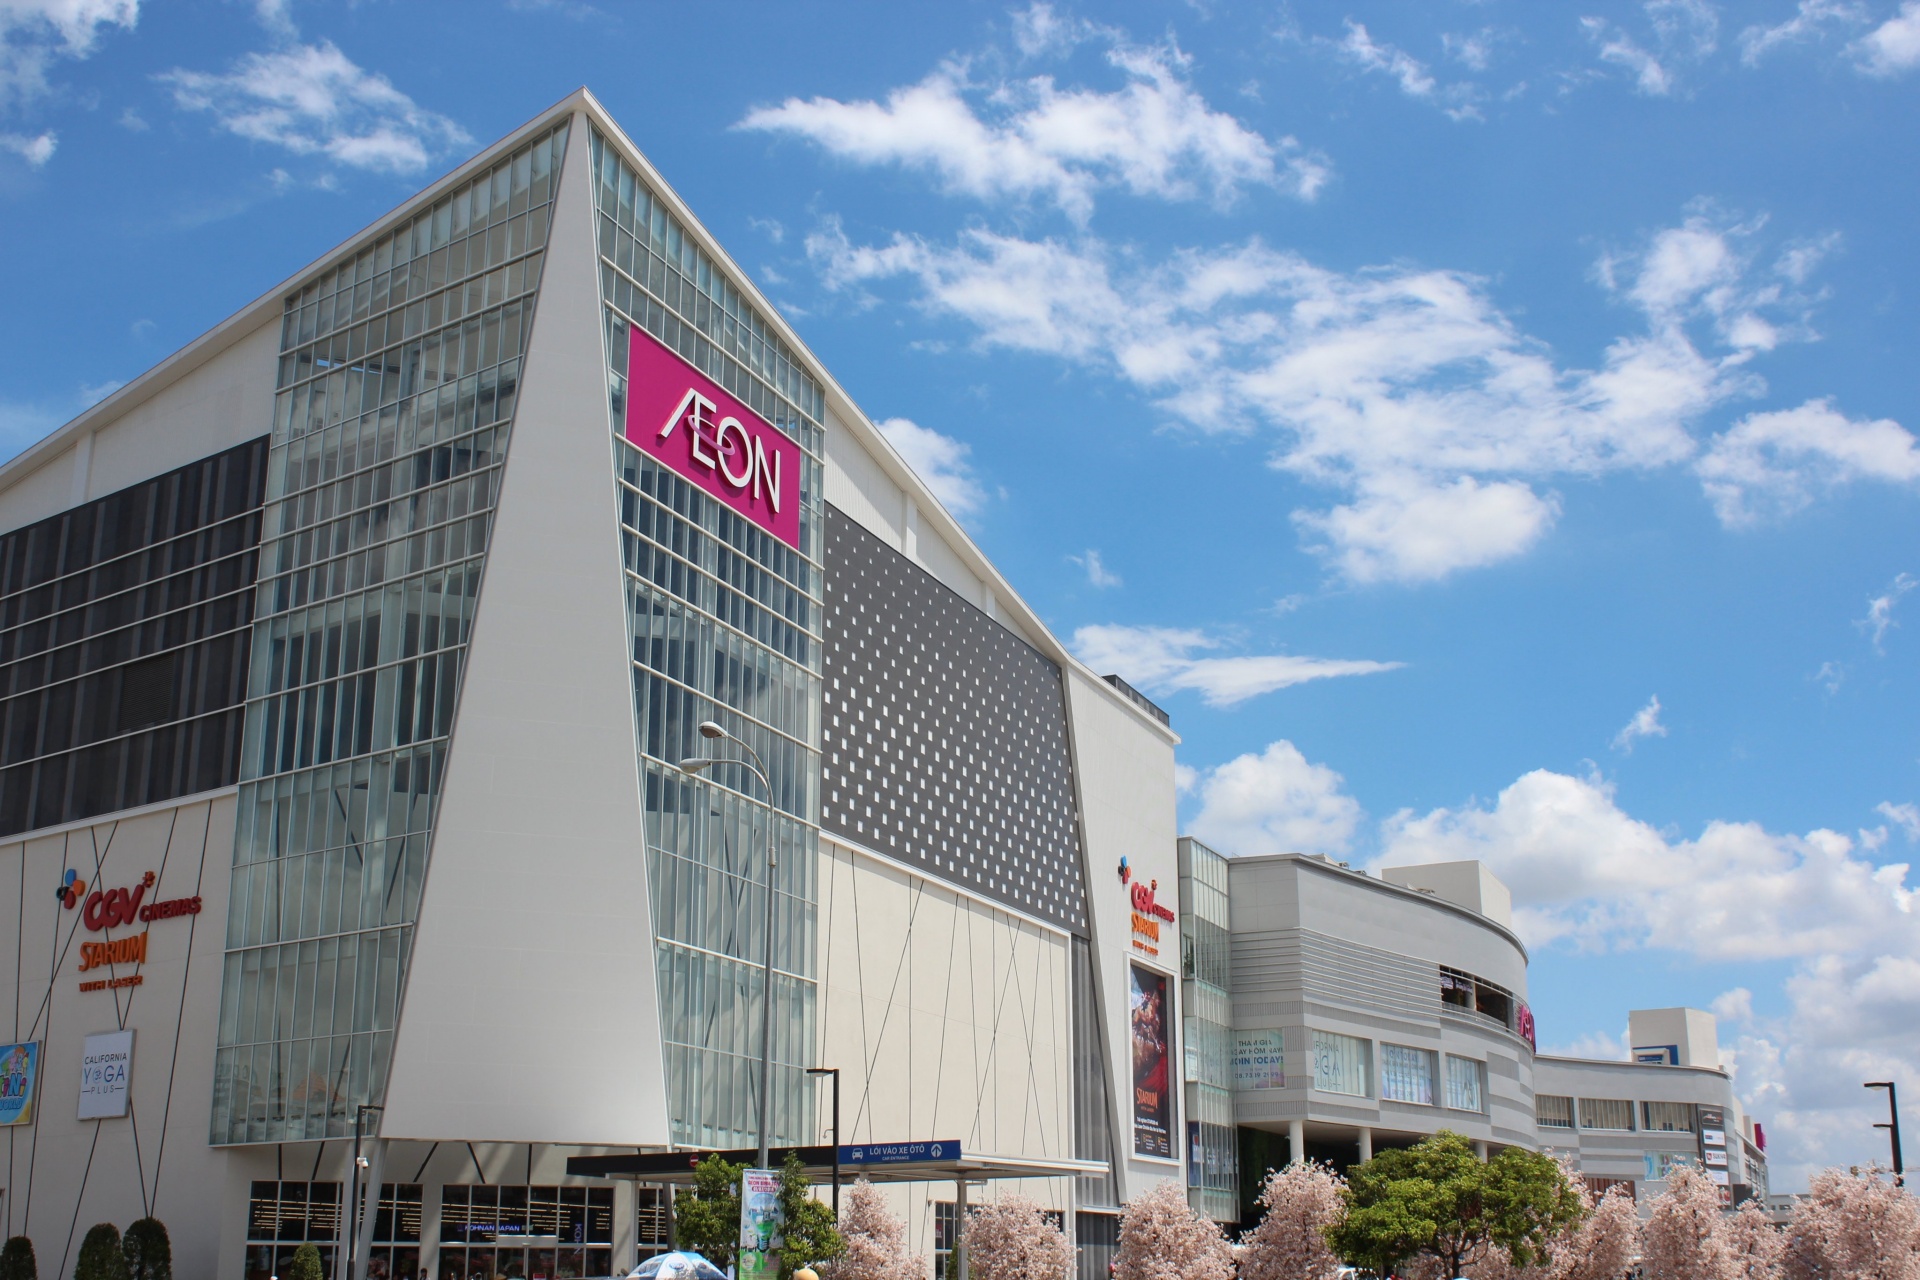 Aeon Mall will invest about 3-4 more projects in Hanoi